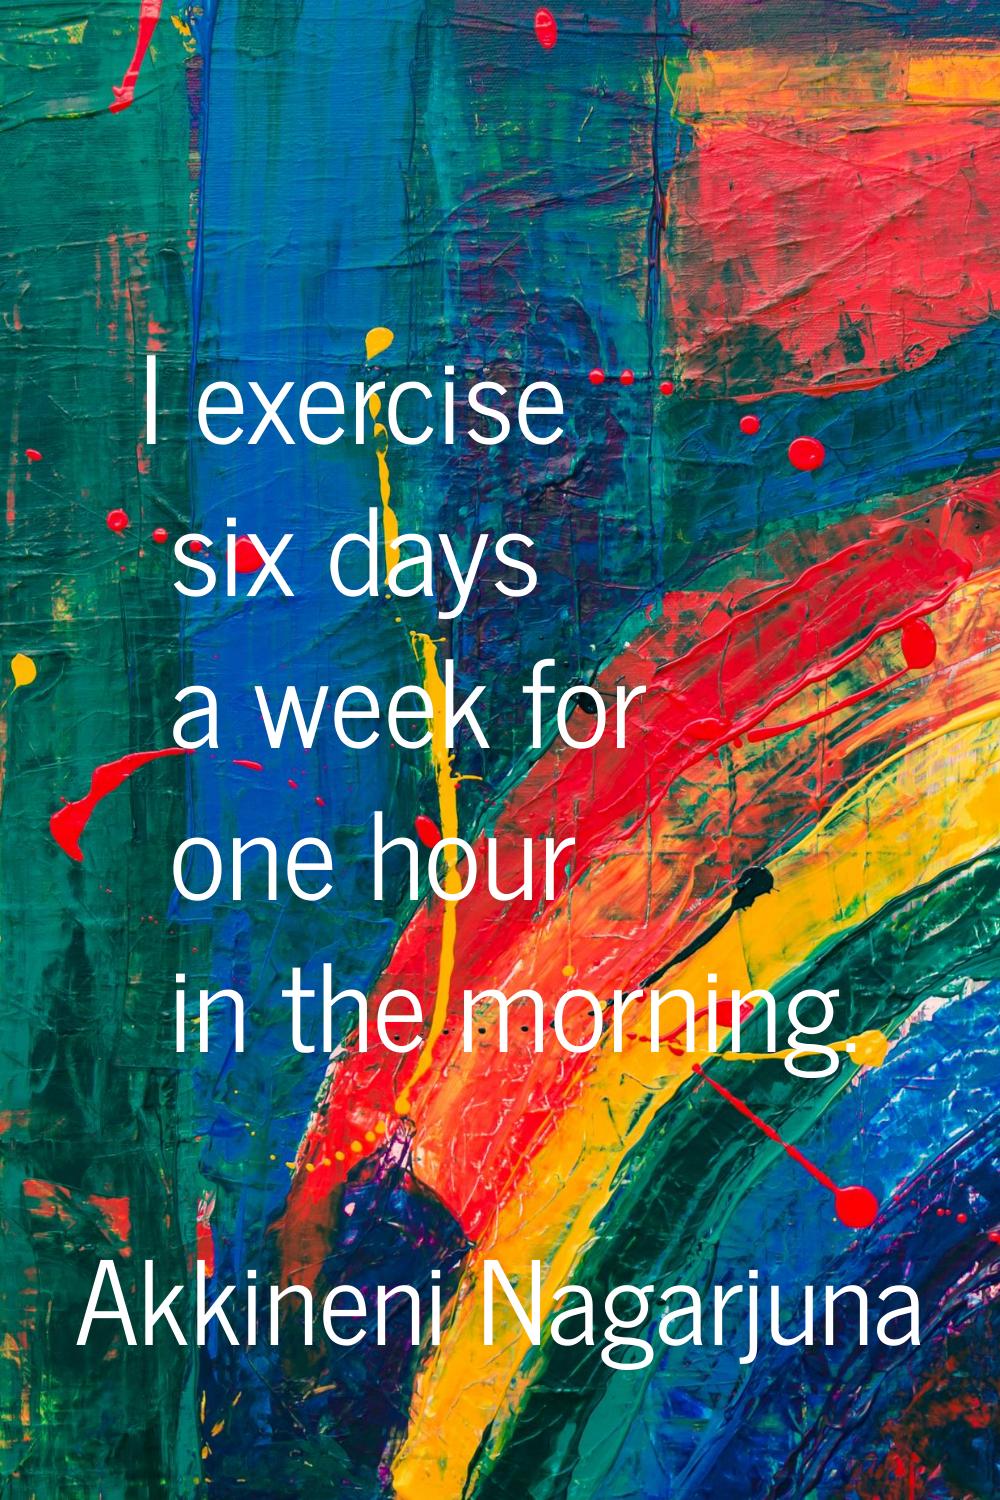 I exercise six days a week for one hour in the morning.